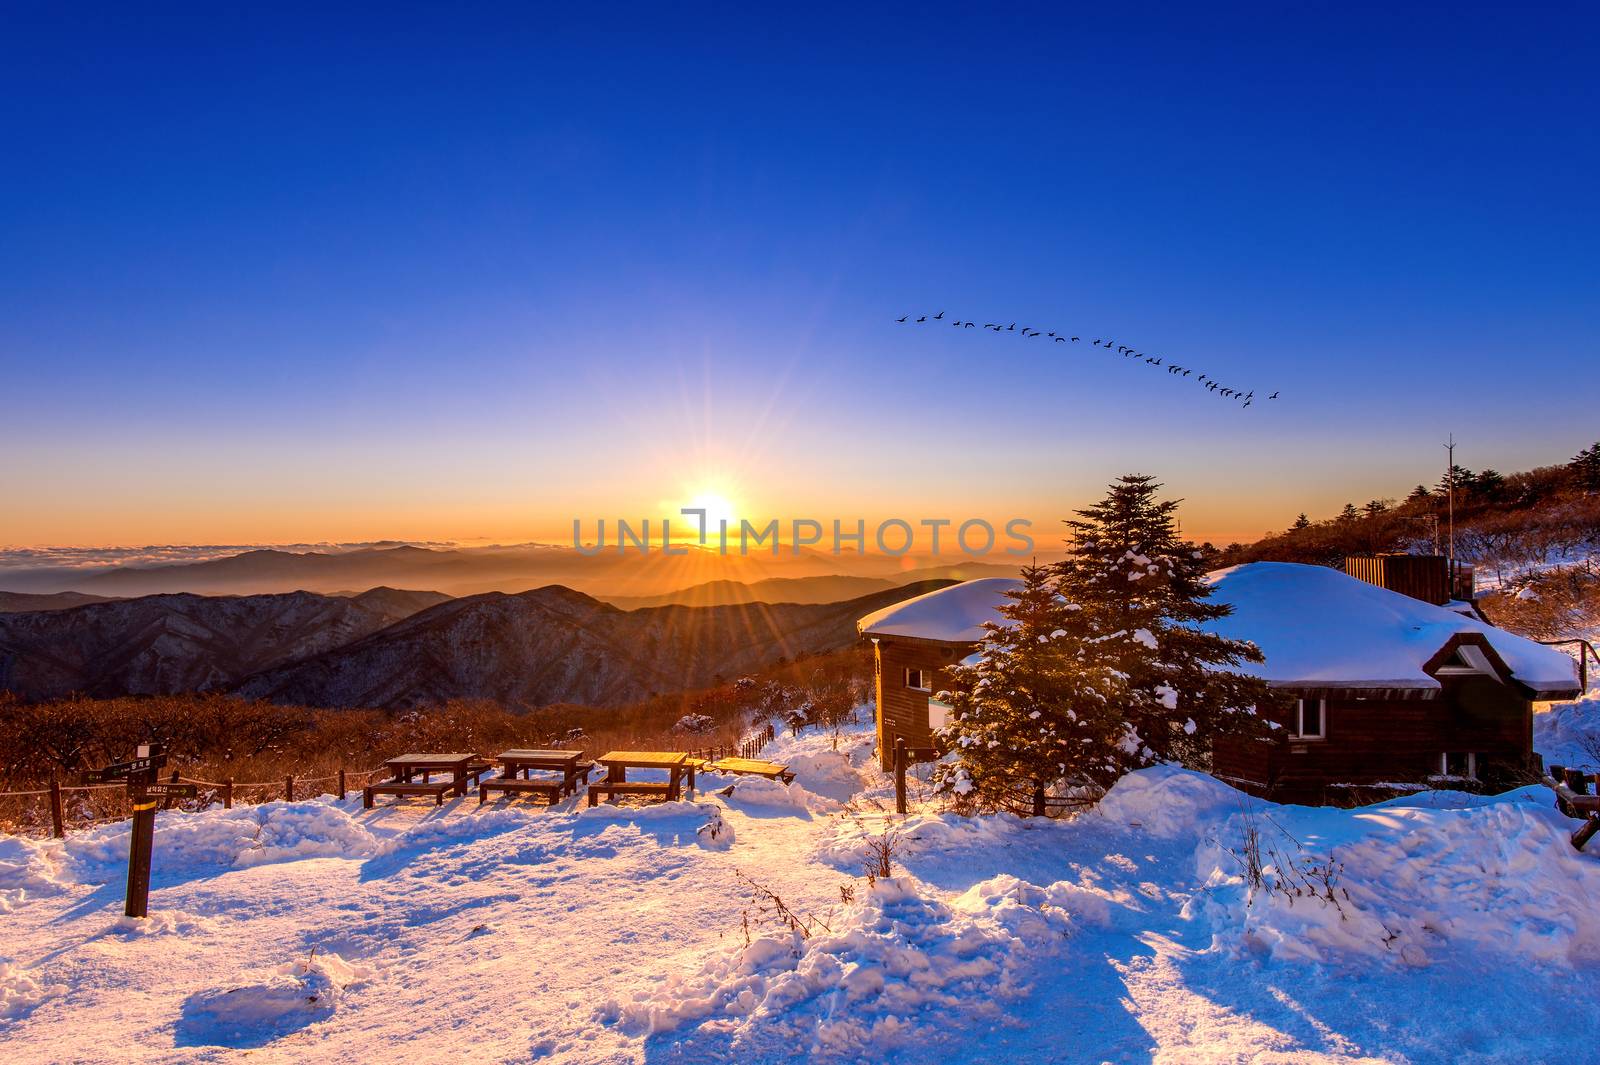 Sunrise with beautiful Lens Flare and silhouettes of birds at De by gutarphotoghaphy